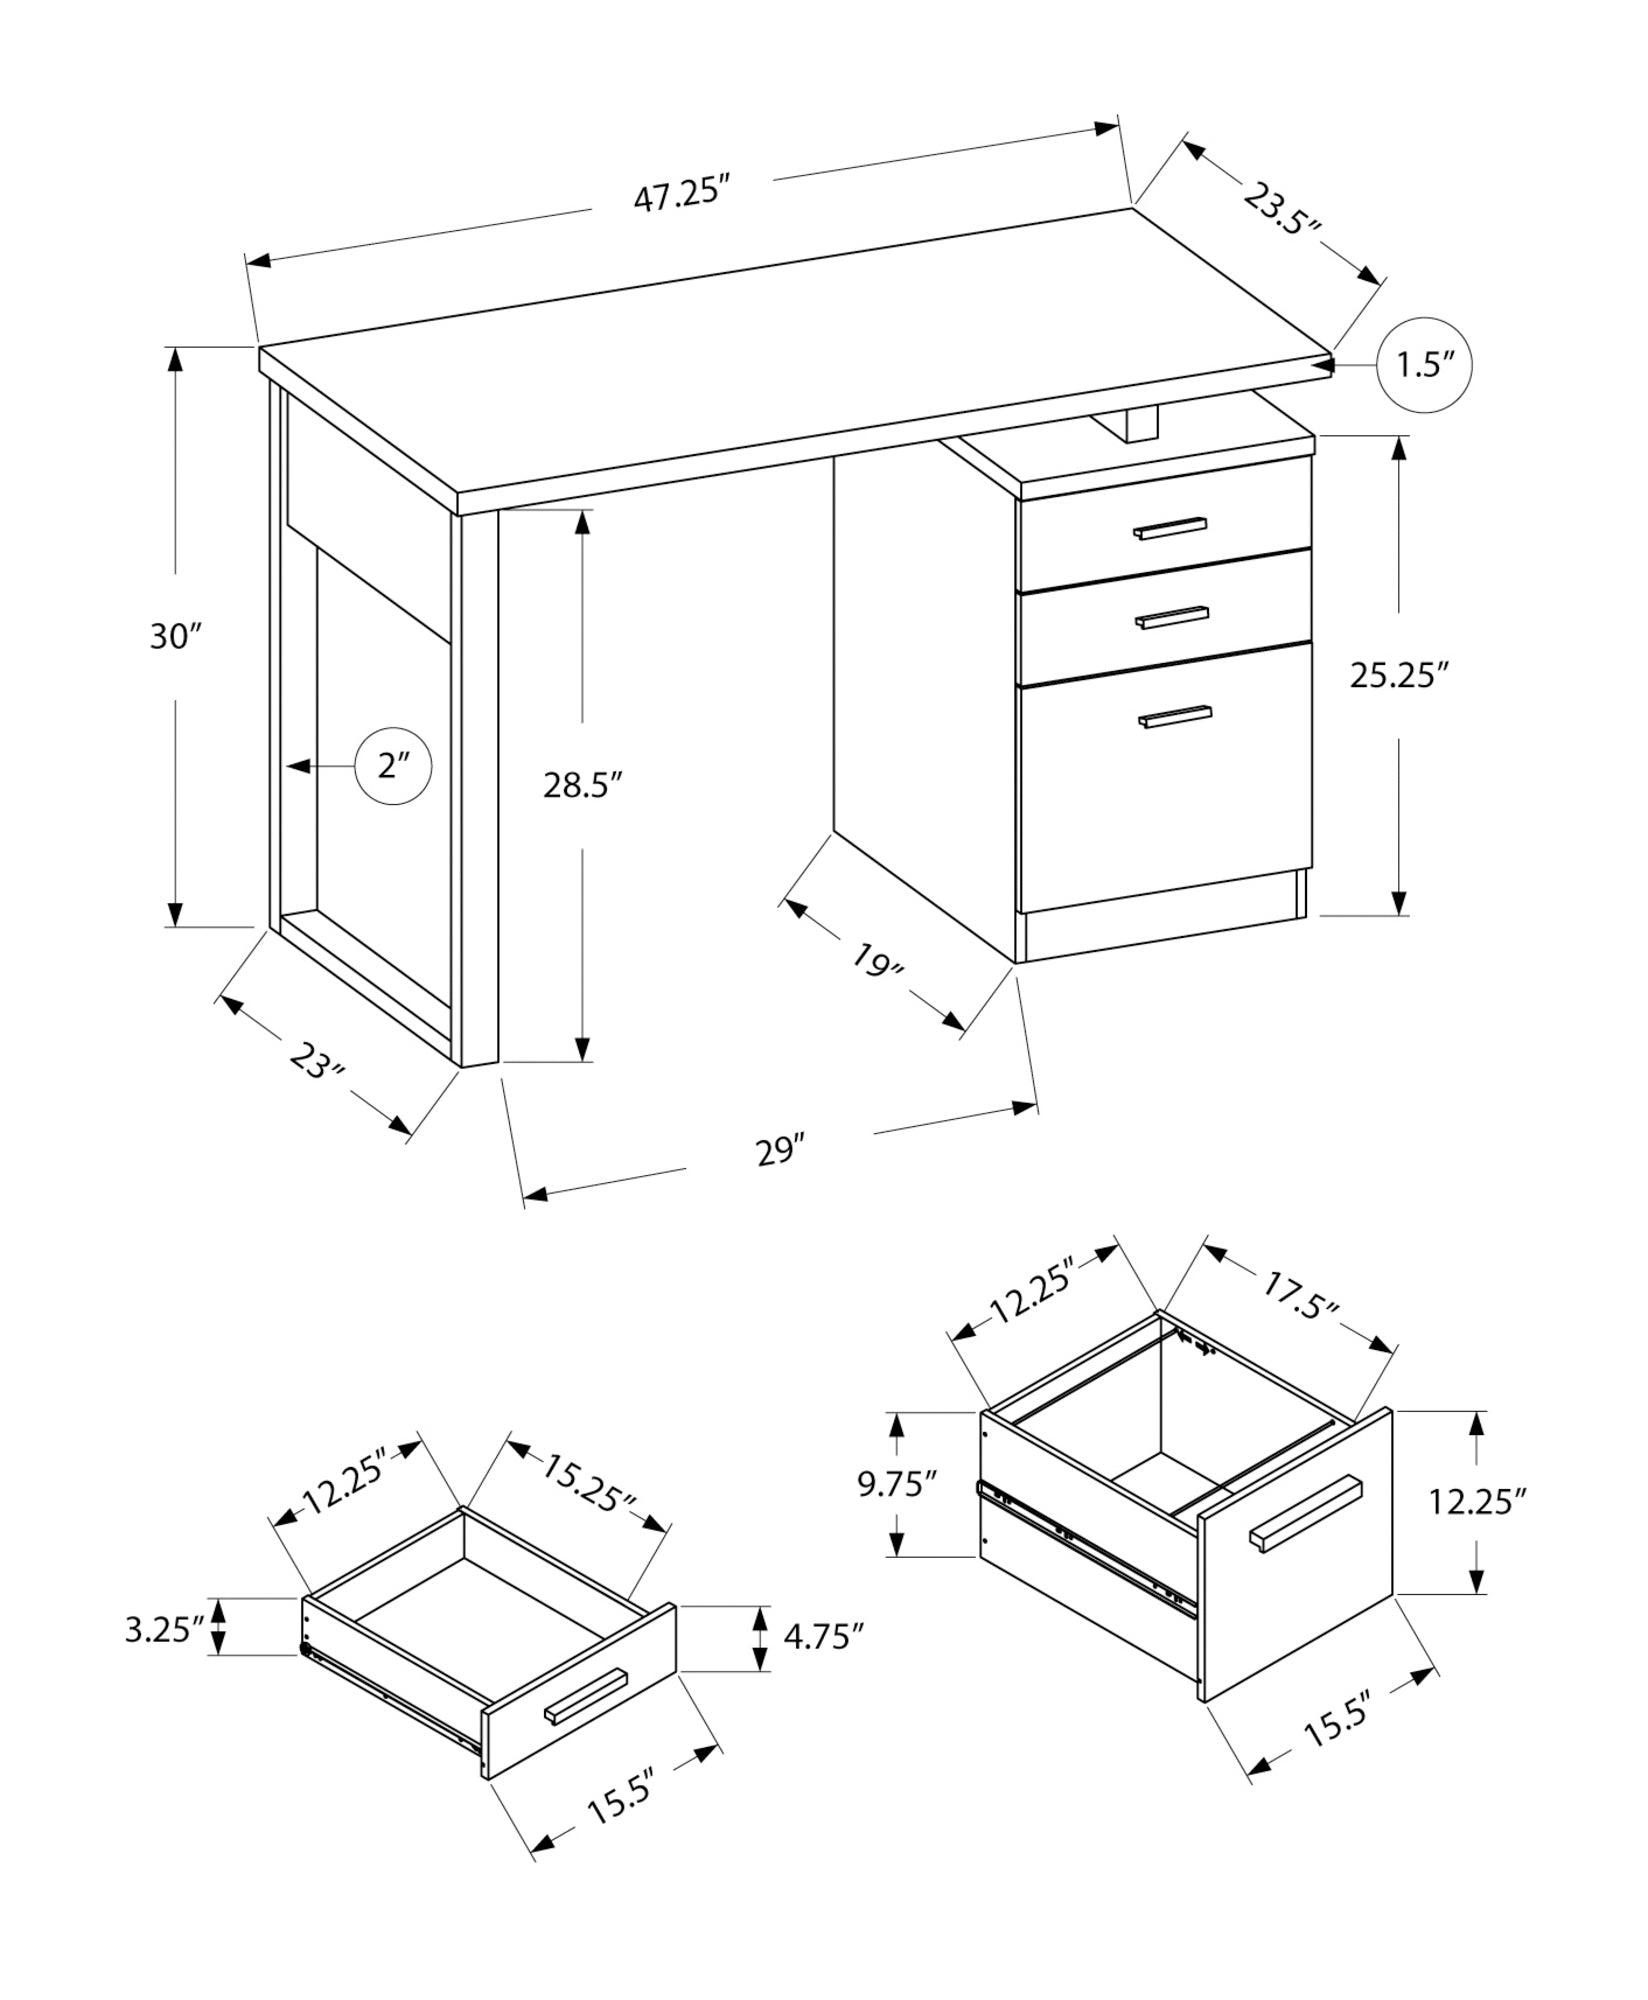 MN-797690    Computer Desk, Home Office, Laptop, Left, Right Set-Up, Storage Drawers, 48"L, Metal, Laminate, White, Contemporary, Modern